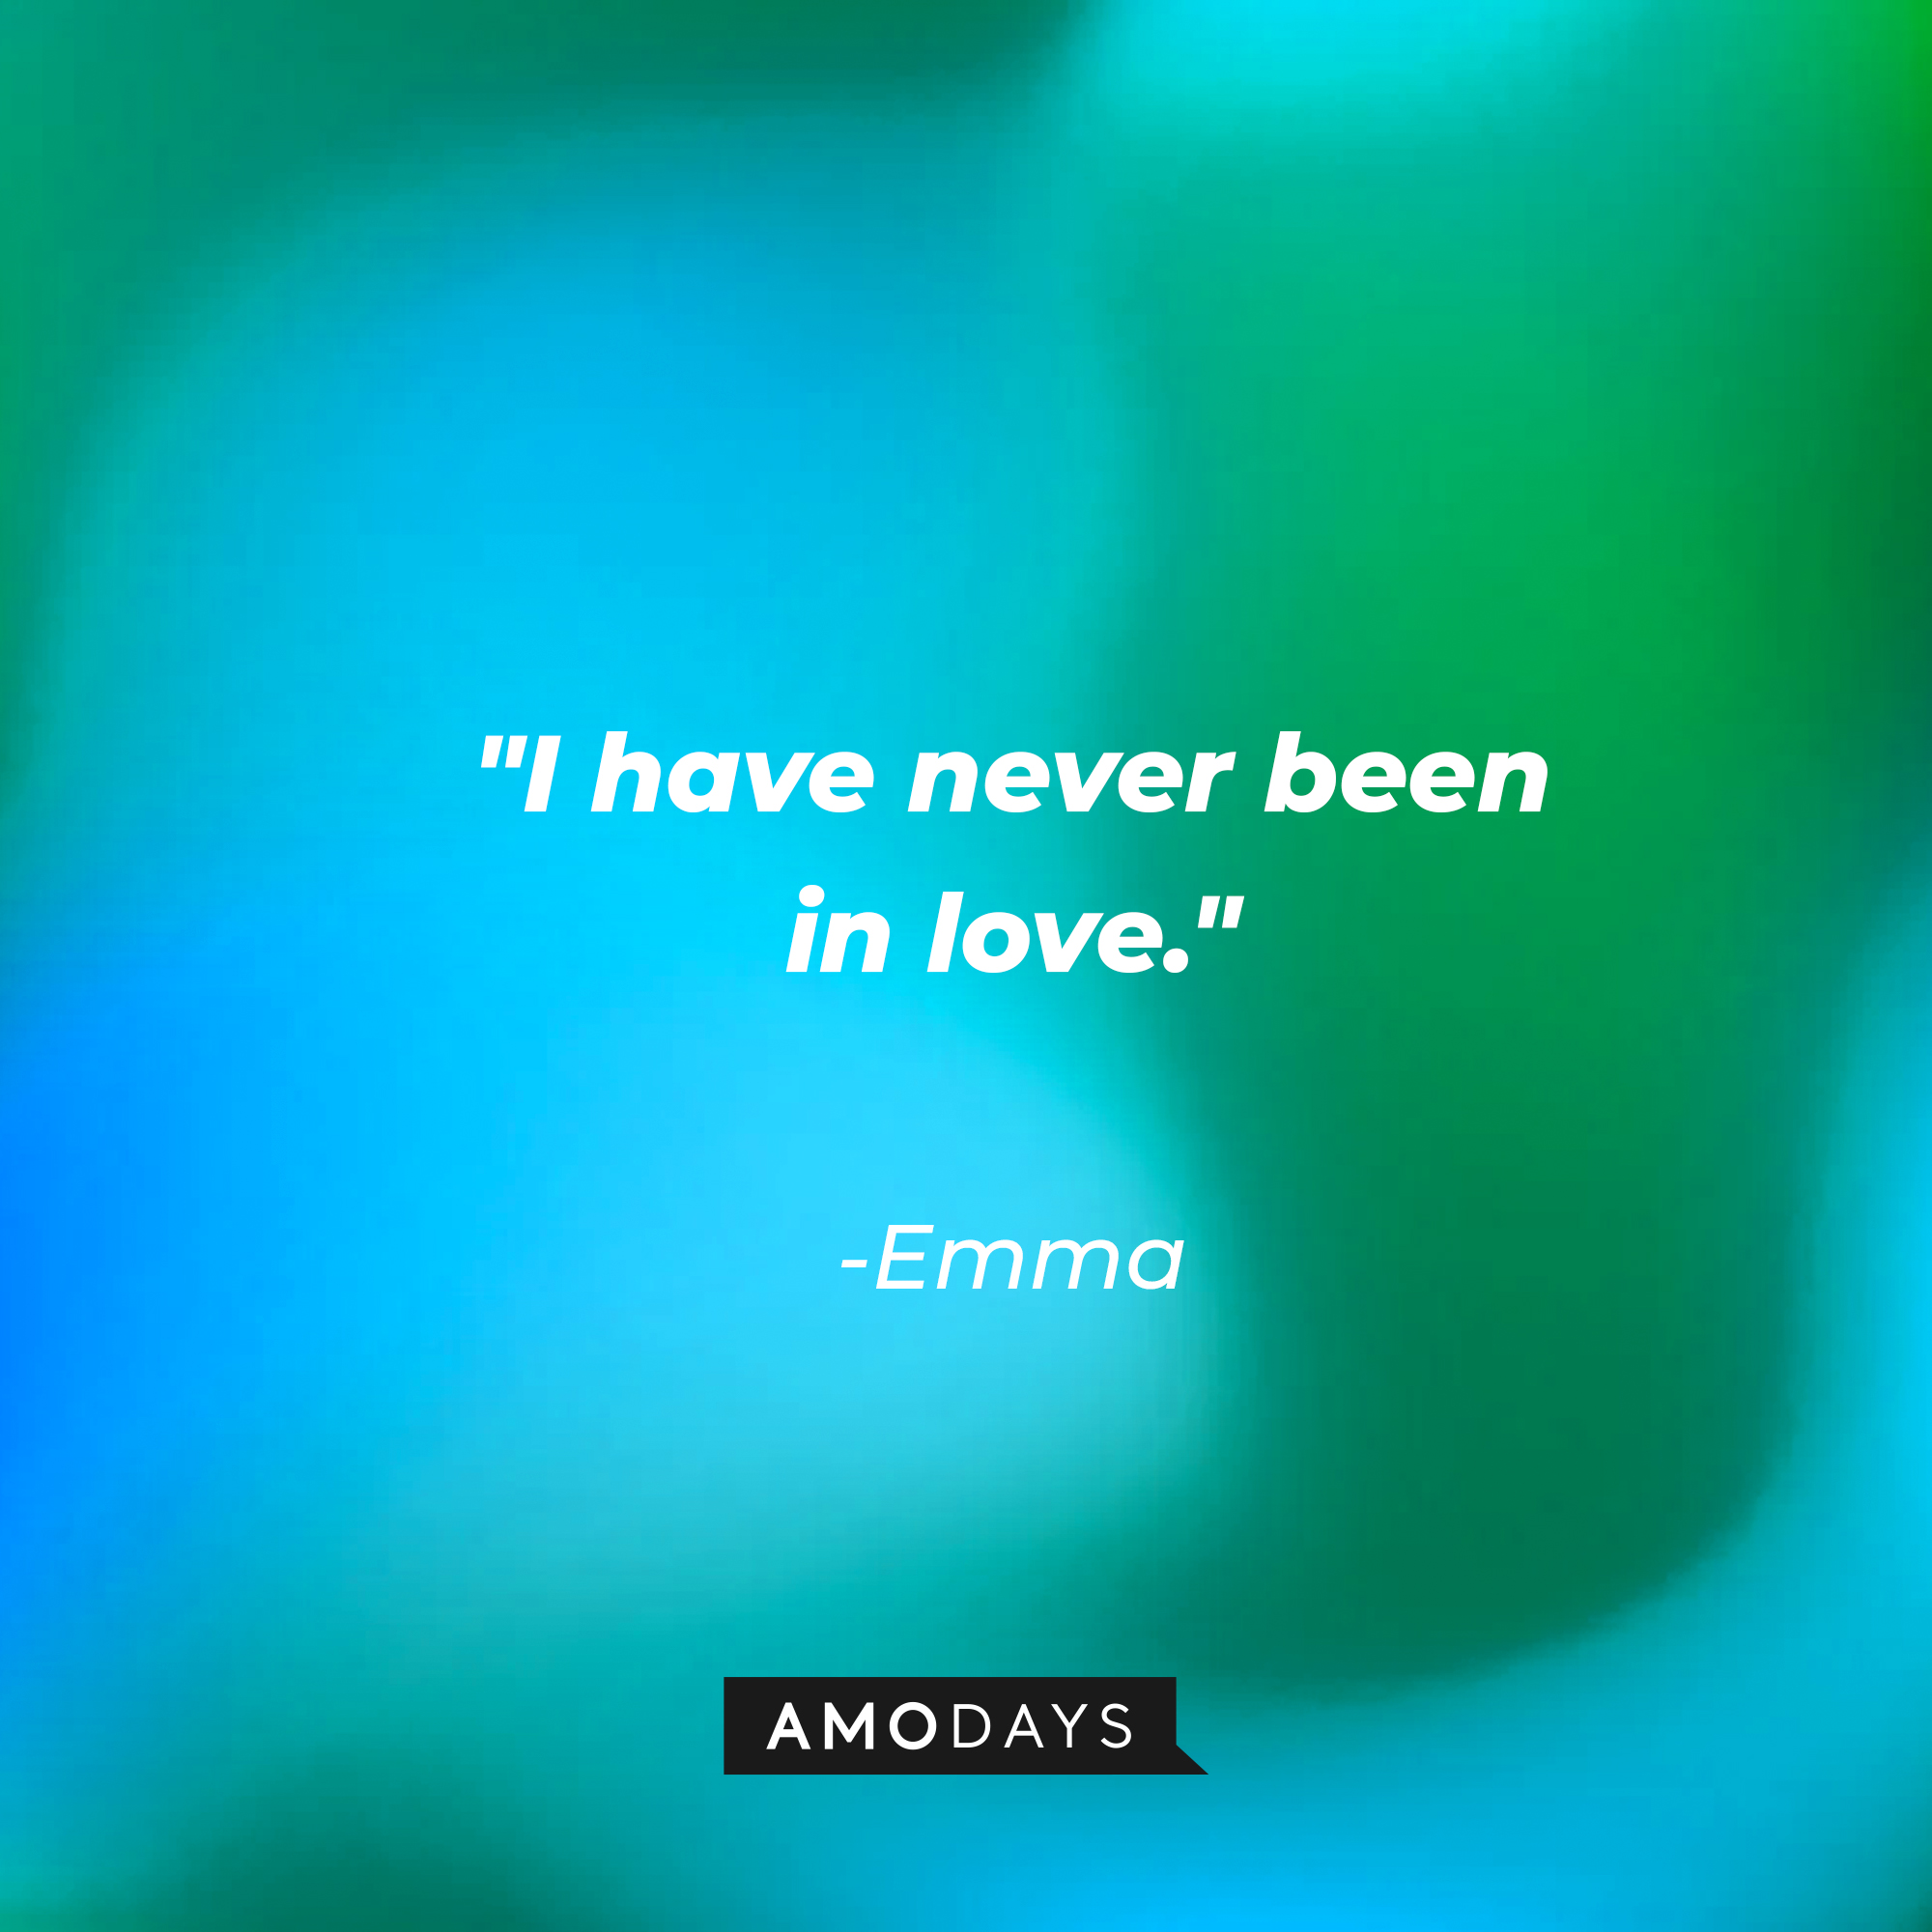 Emma's quote: "I have never been in love."  | Source: Amodays